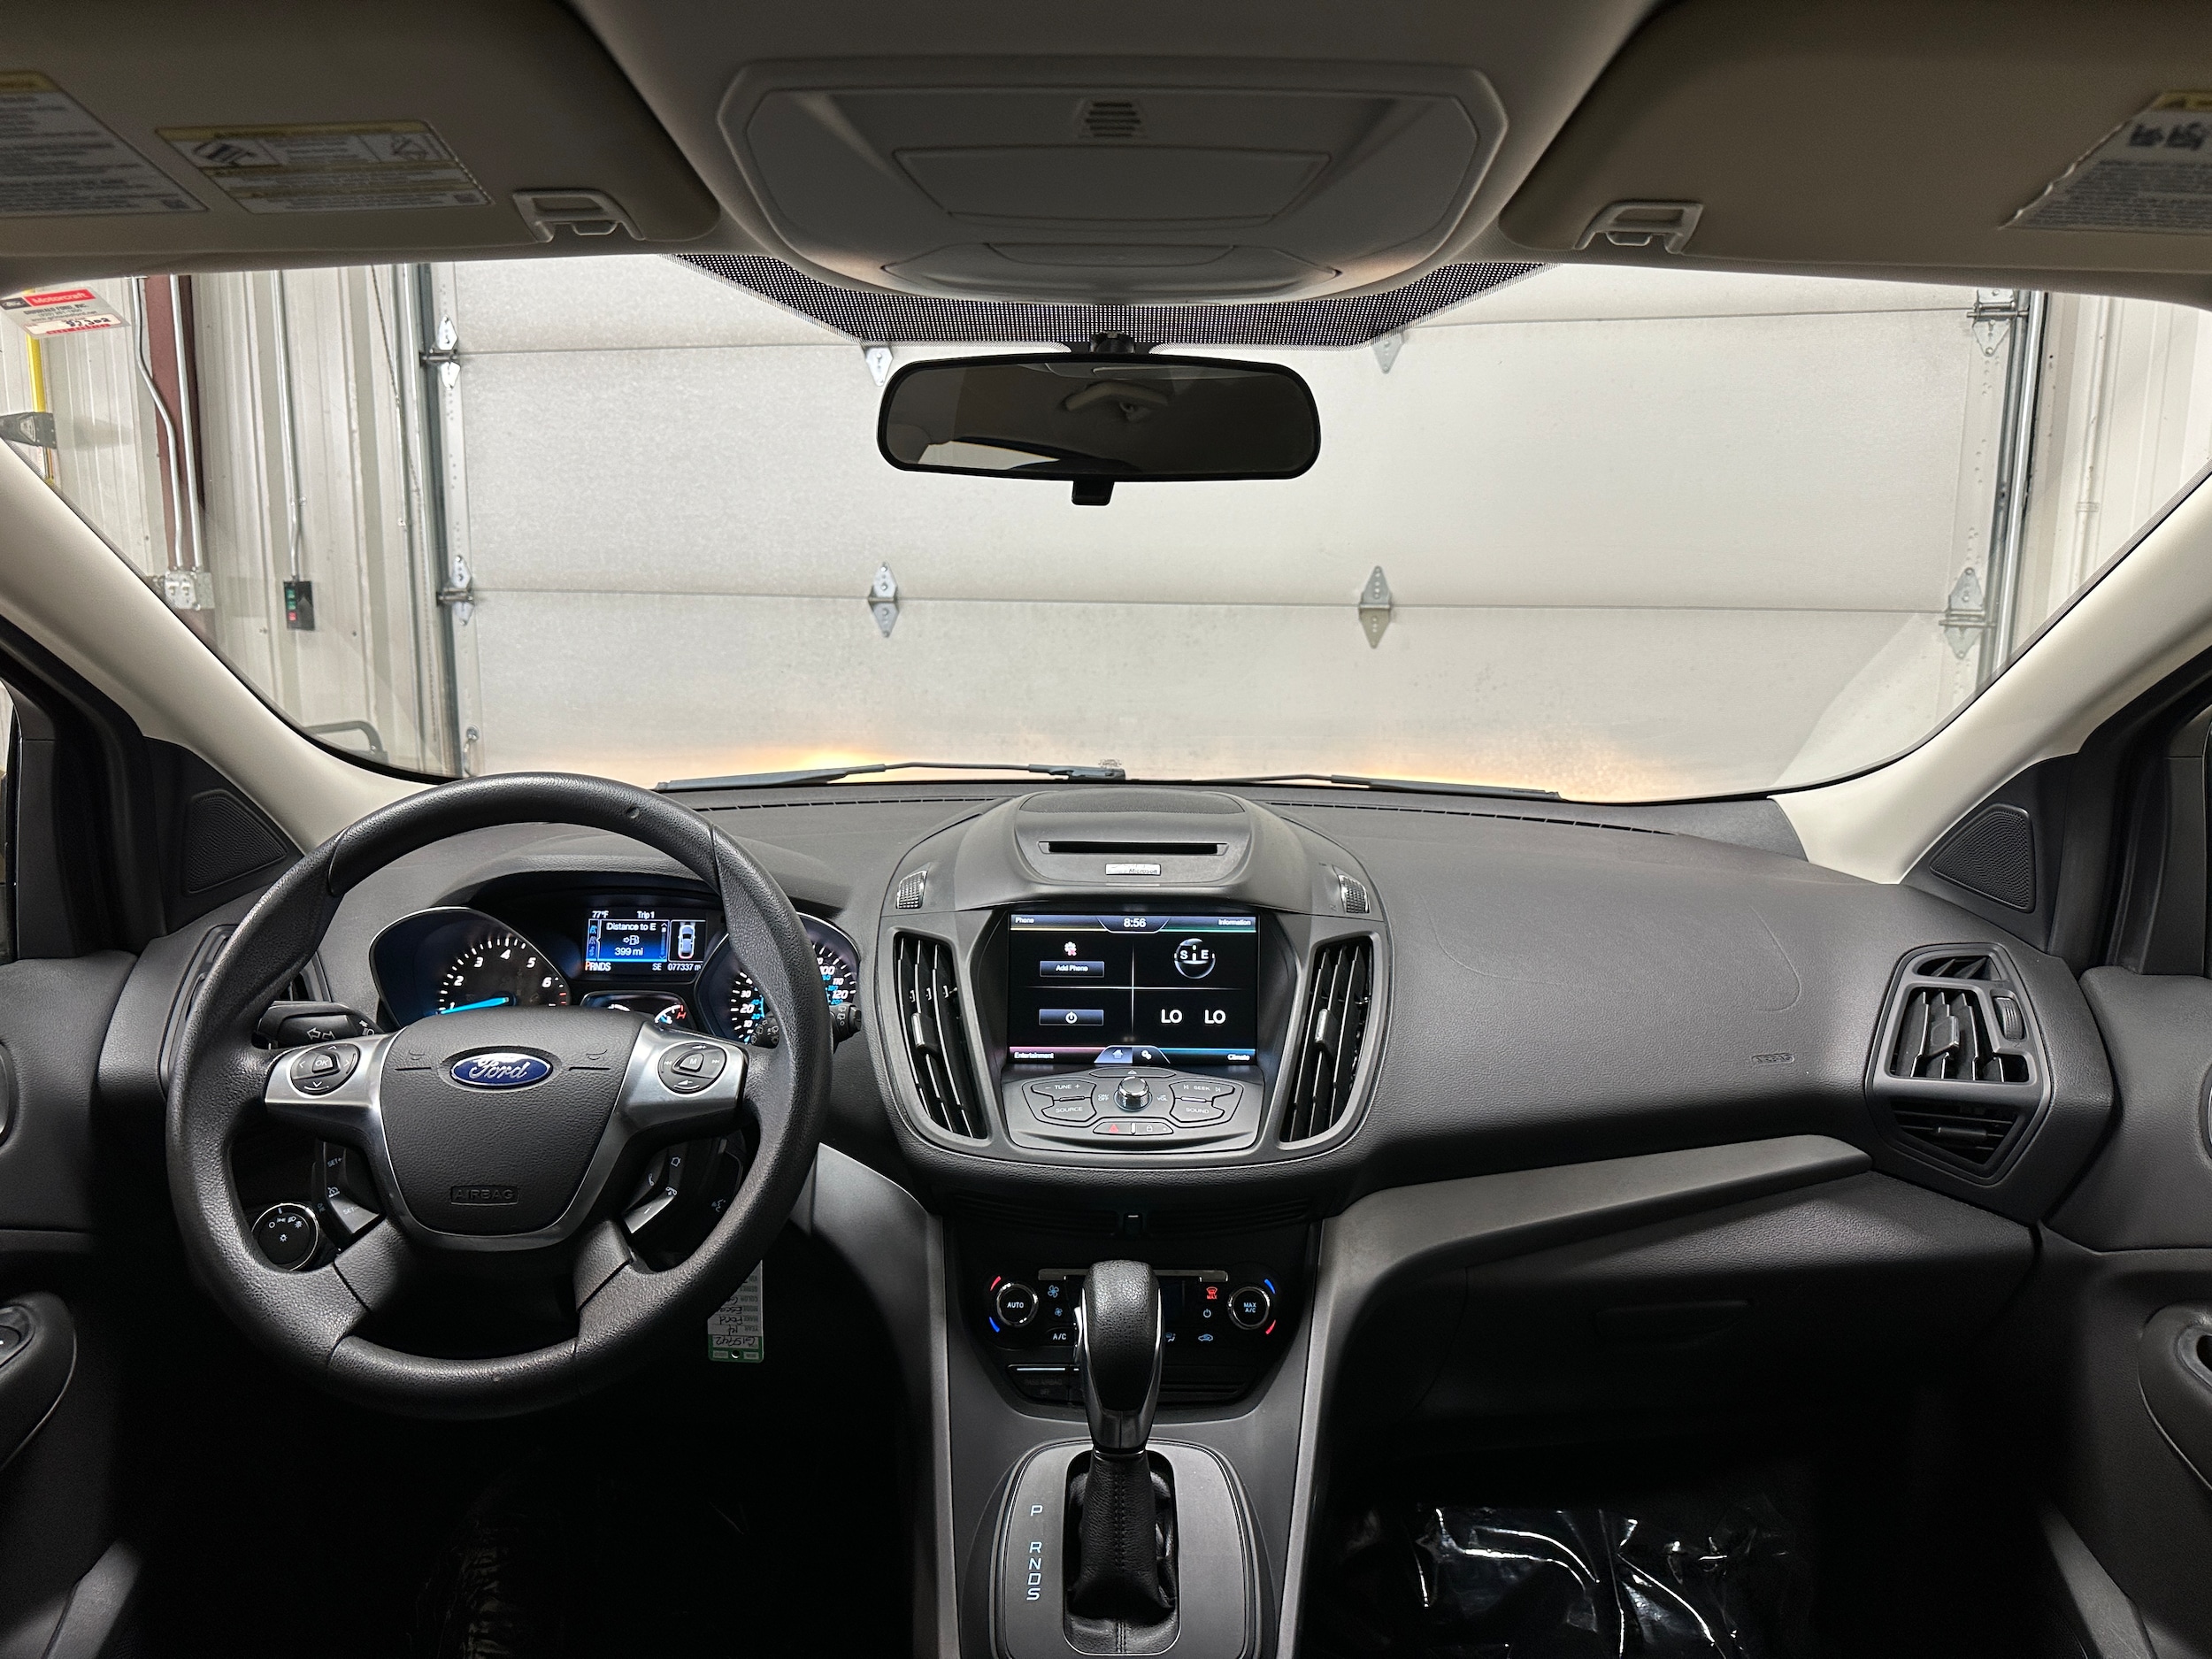 Used 2014 Ford Escape SE with VIN 1FMCU9GX3EUD60352 for sale in Watertown, WI